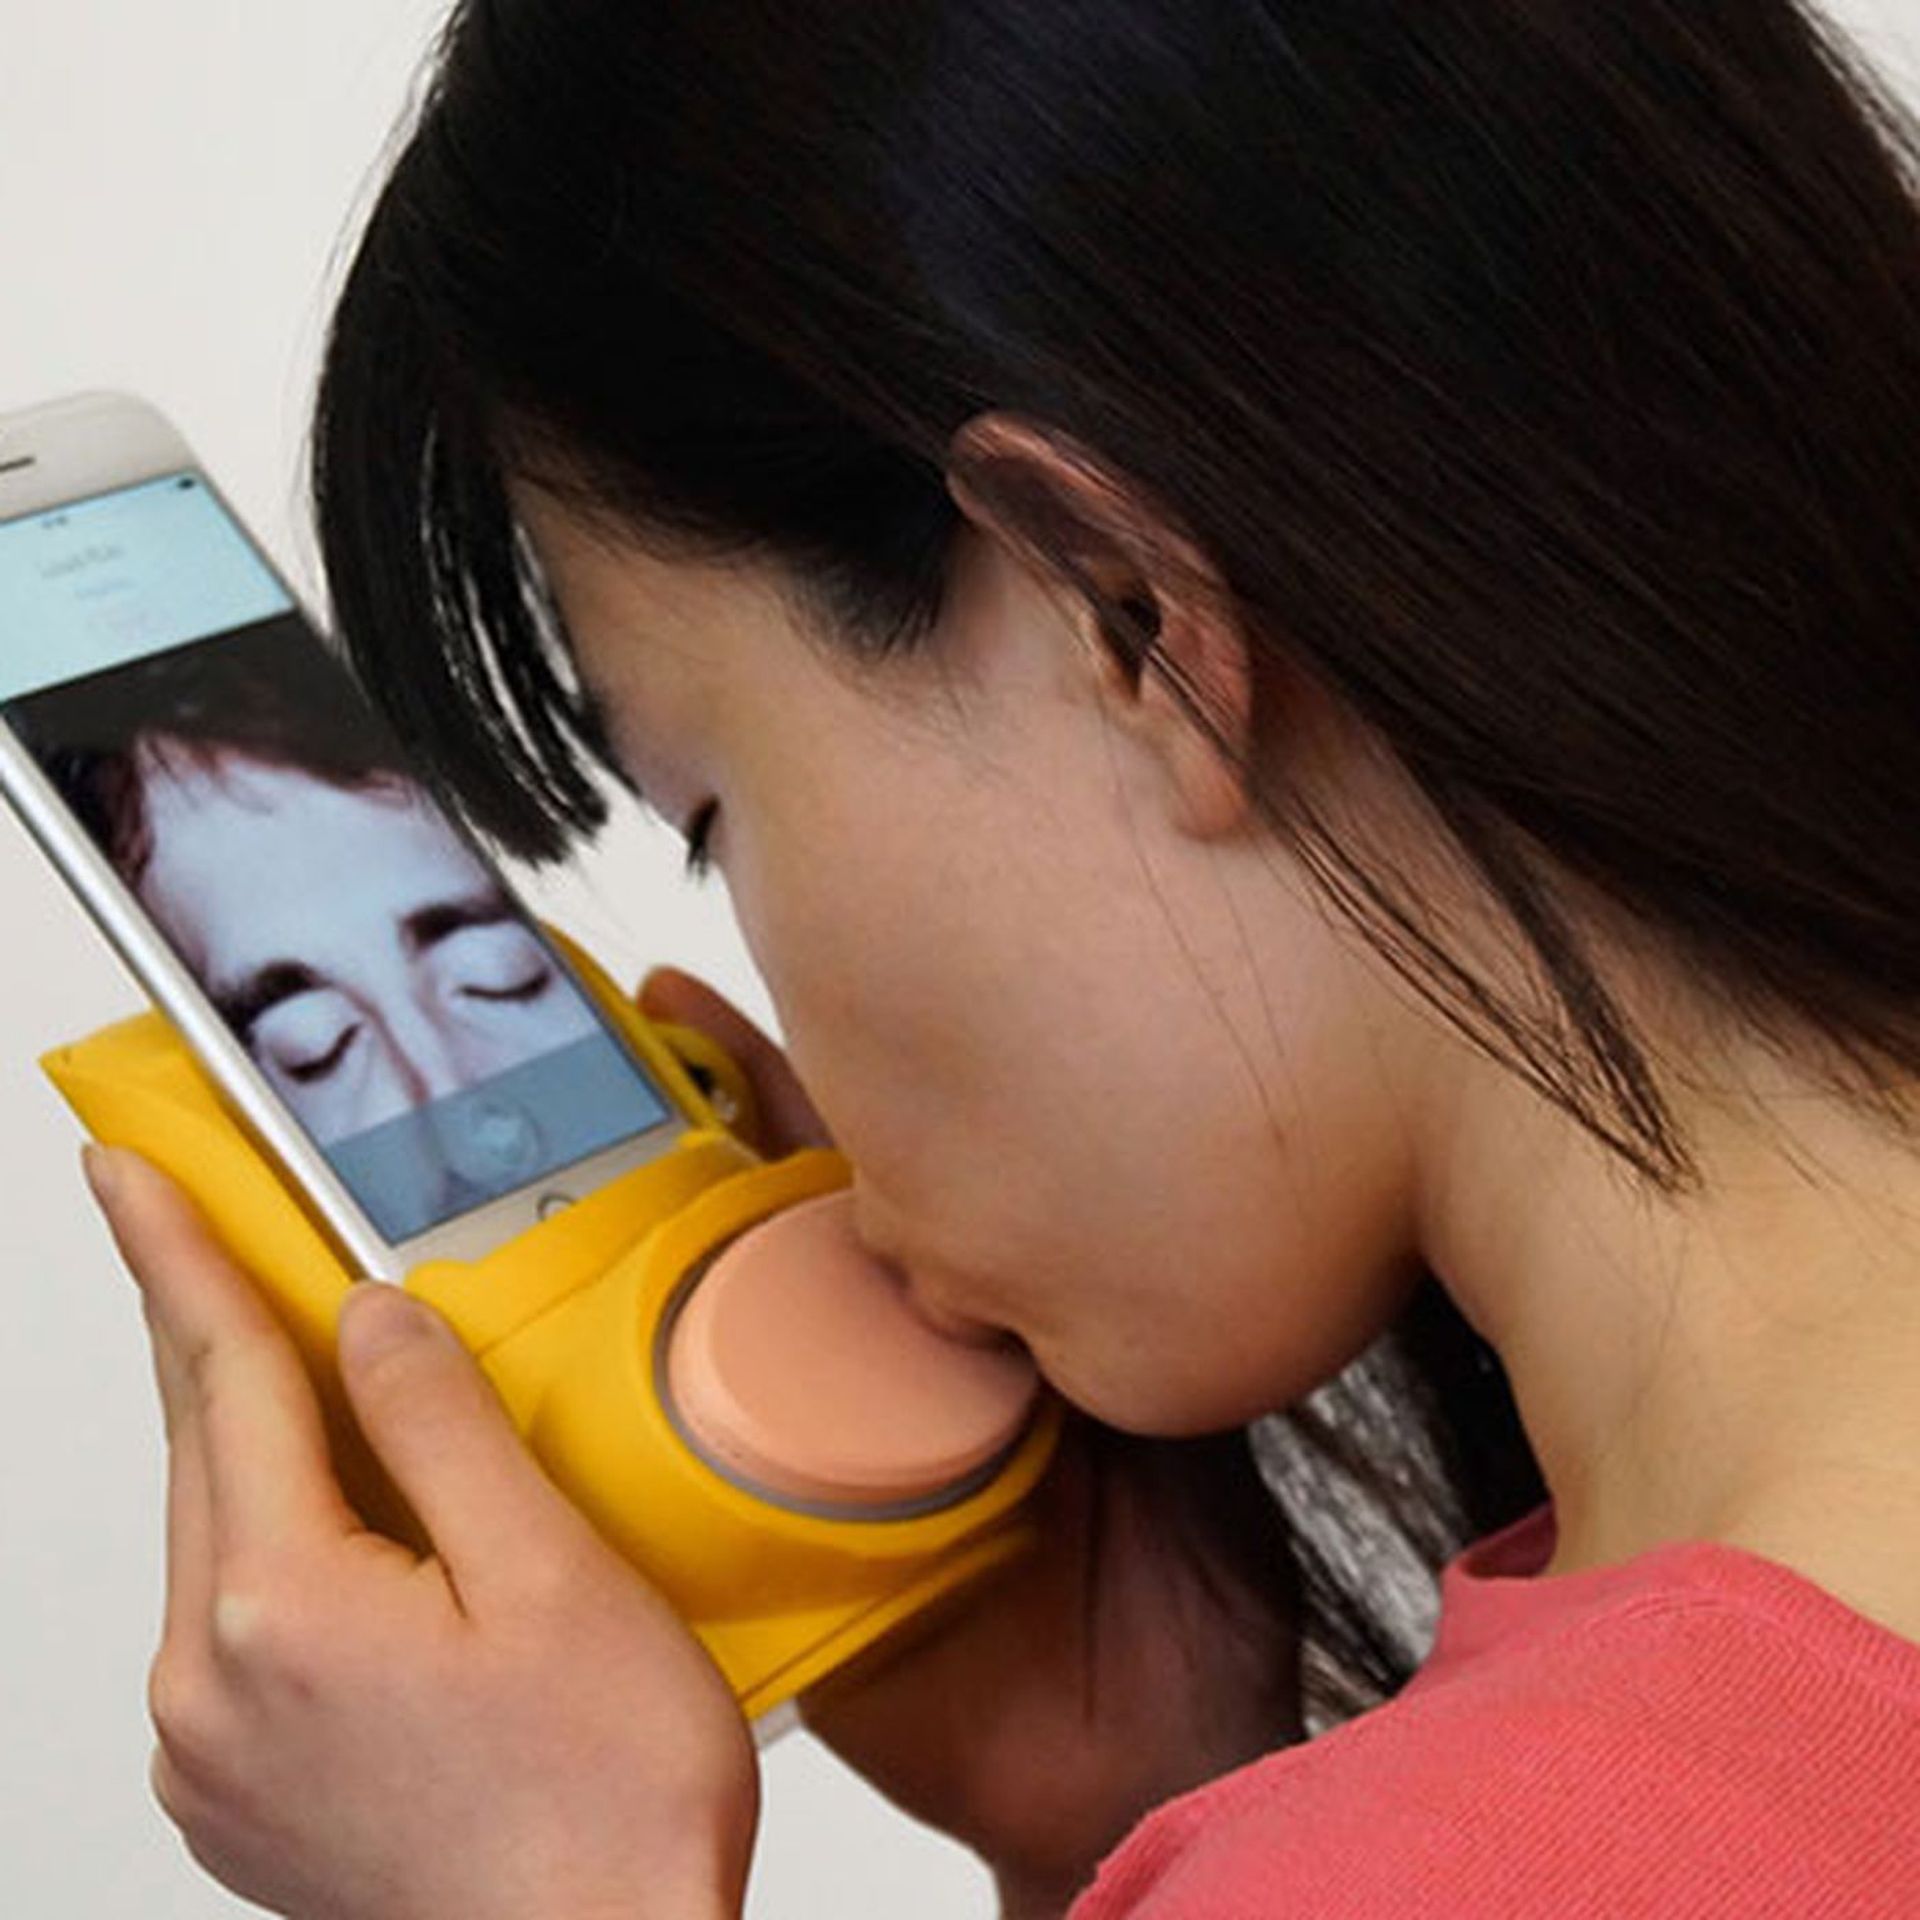 Chinese kissing device